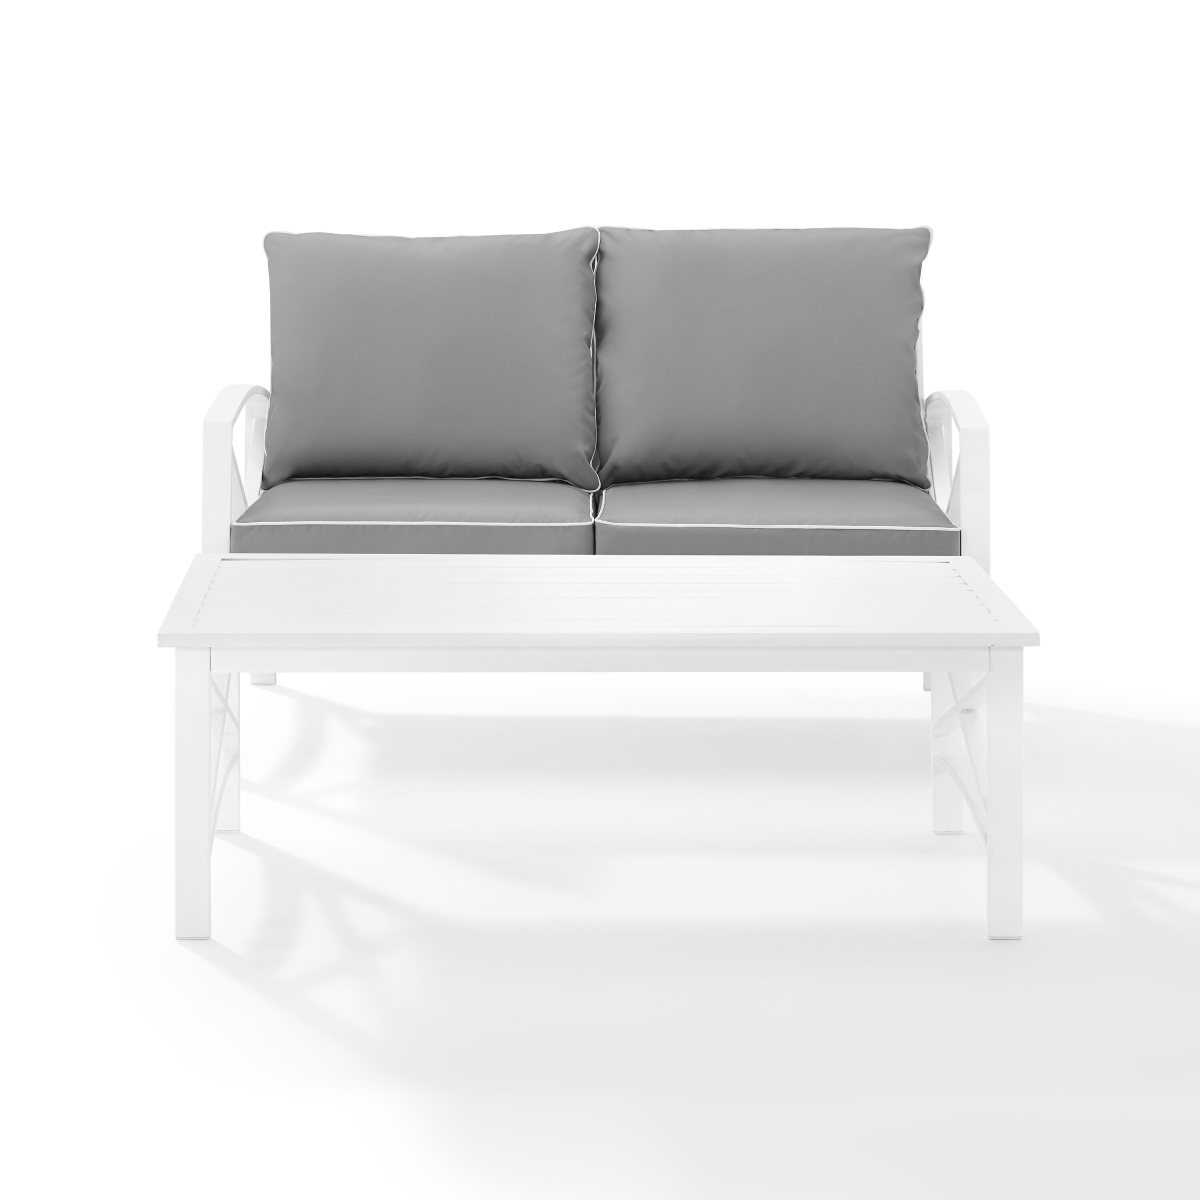 Ko60010wh-gy Kaplan 2-piece Outdoor Seating Set In White With Gray Cushions